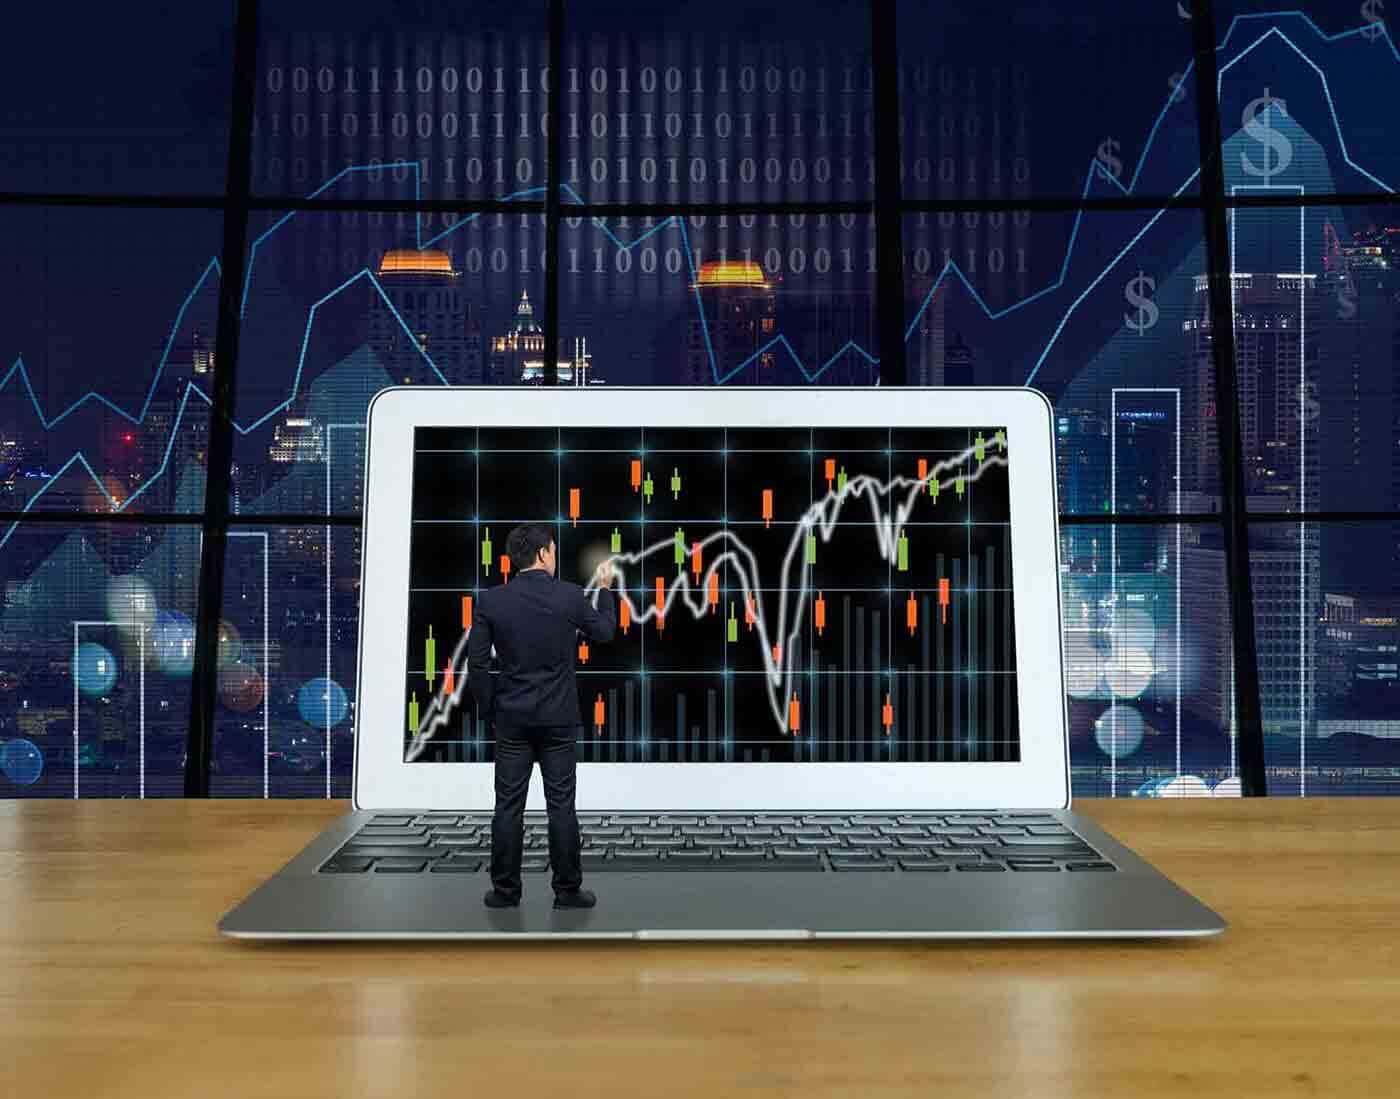 A Complete Guide to using MetaTrader 4 (MT4) with Olymp Trade